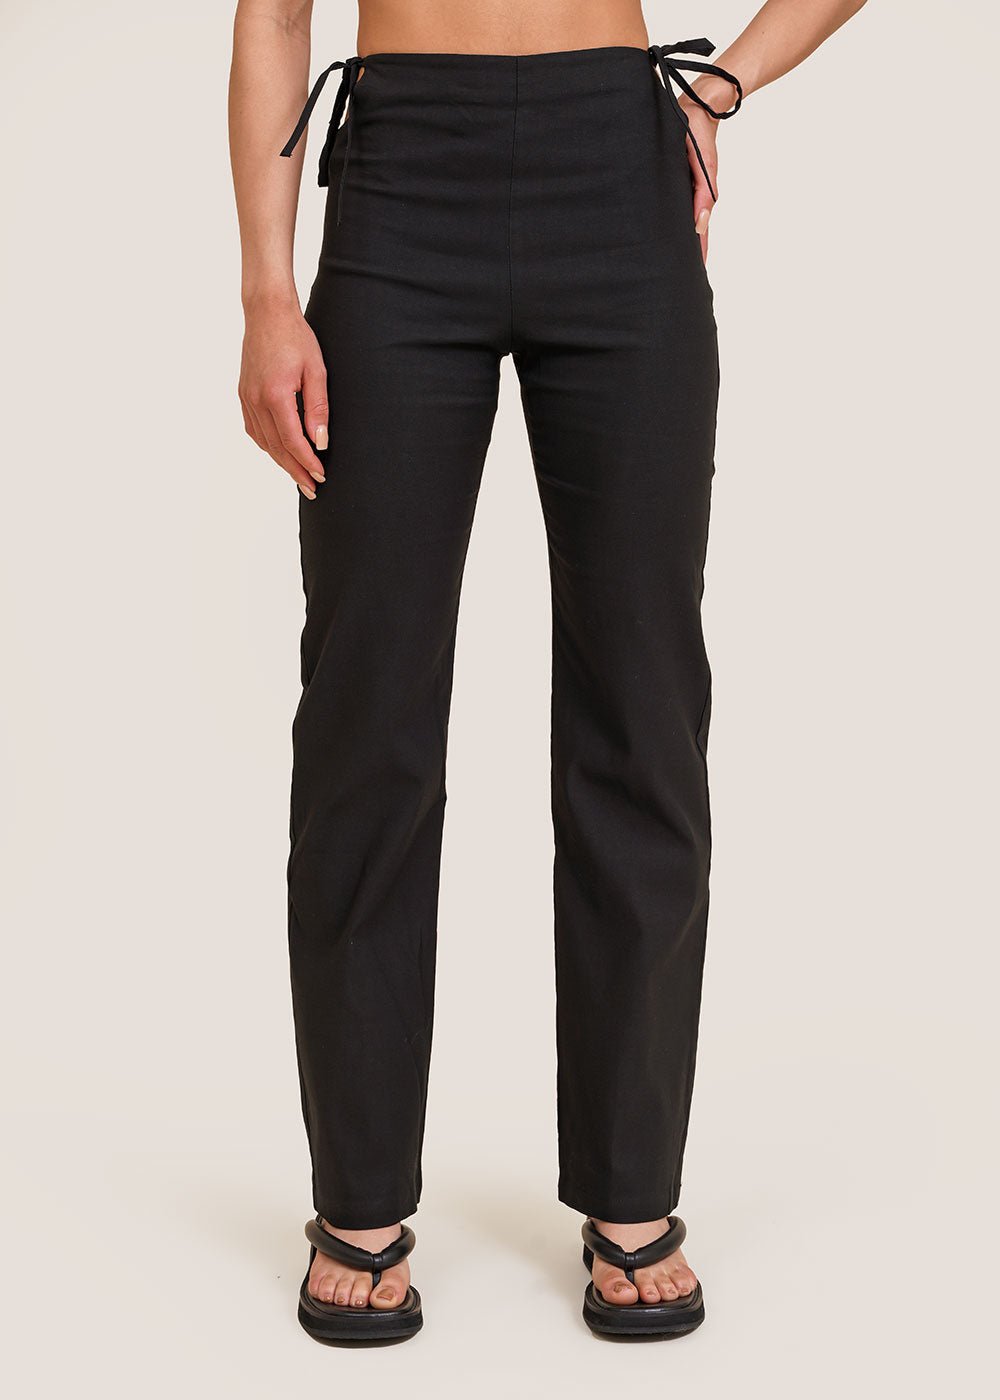 Paloma Wool Black Scurry Pants - New Classics Studios Sustainable Ethical Fashion Canada